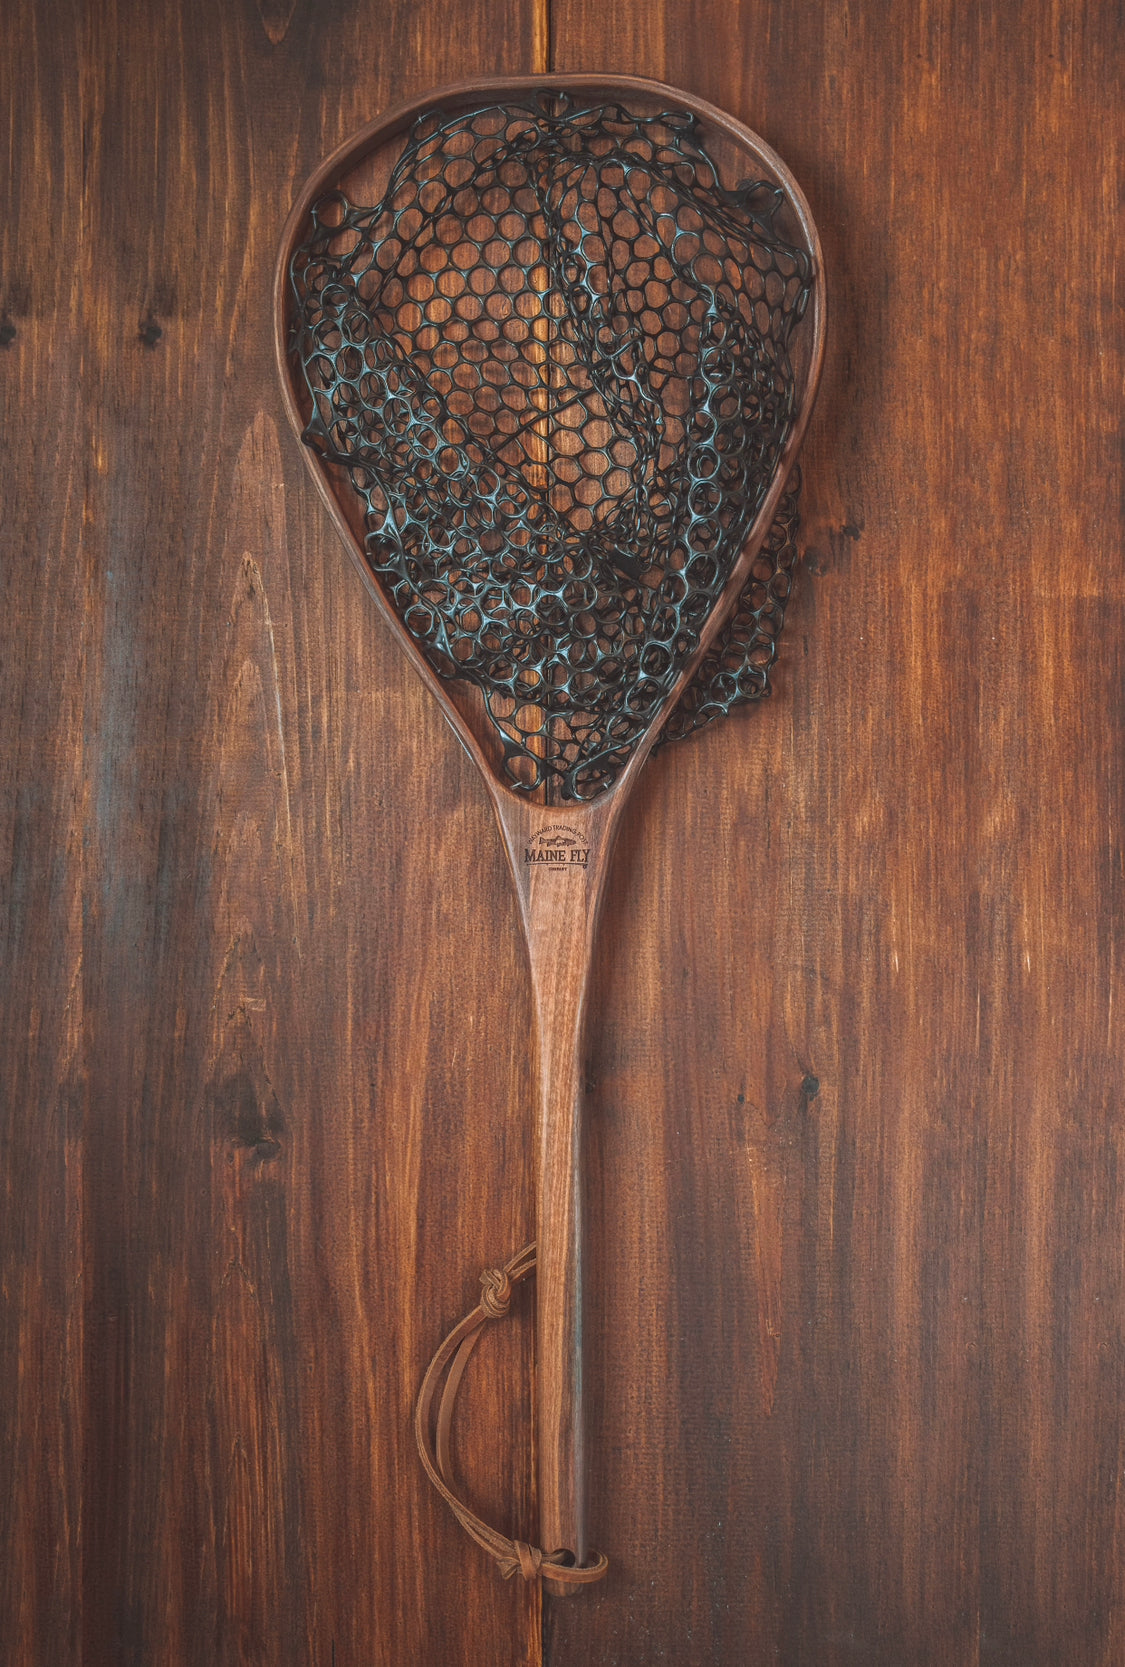 Handmade Fly Fishing Bentwood Landing Net with soft catch and